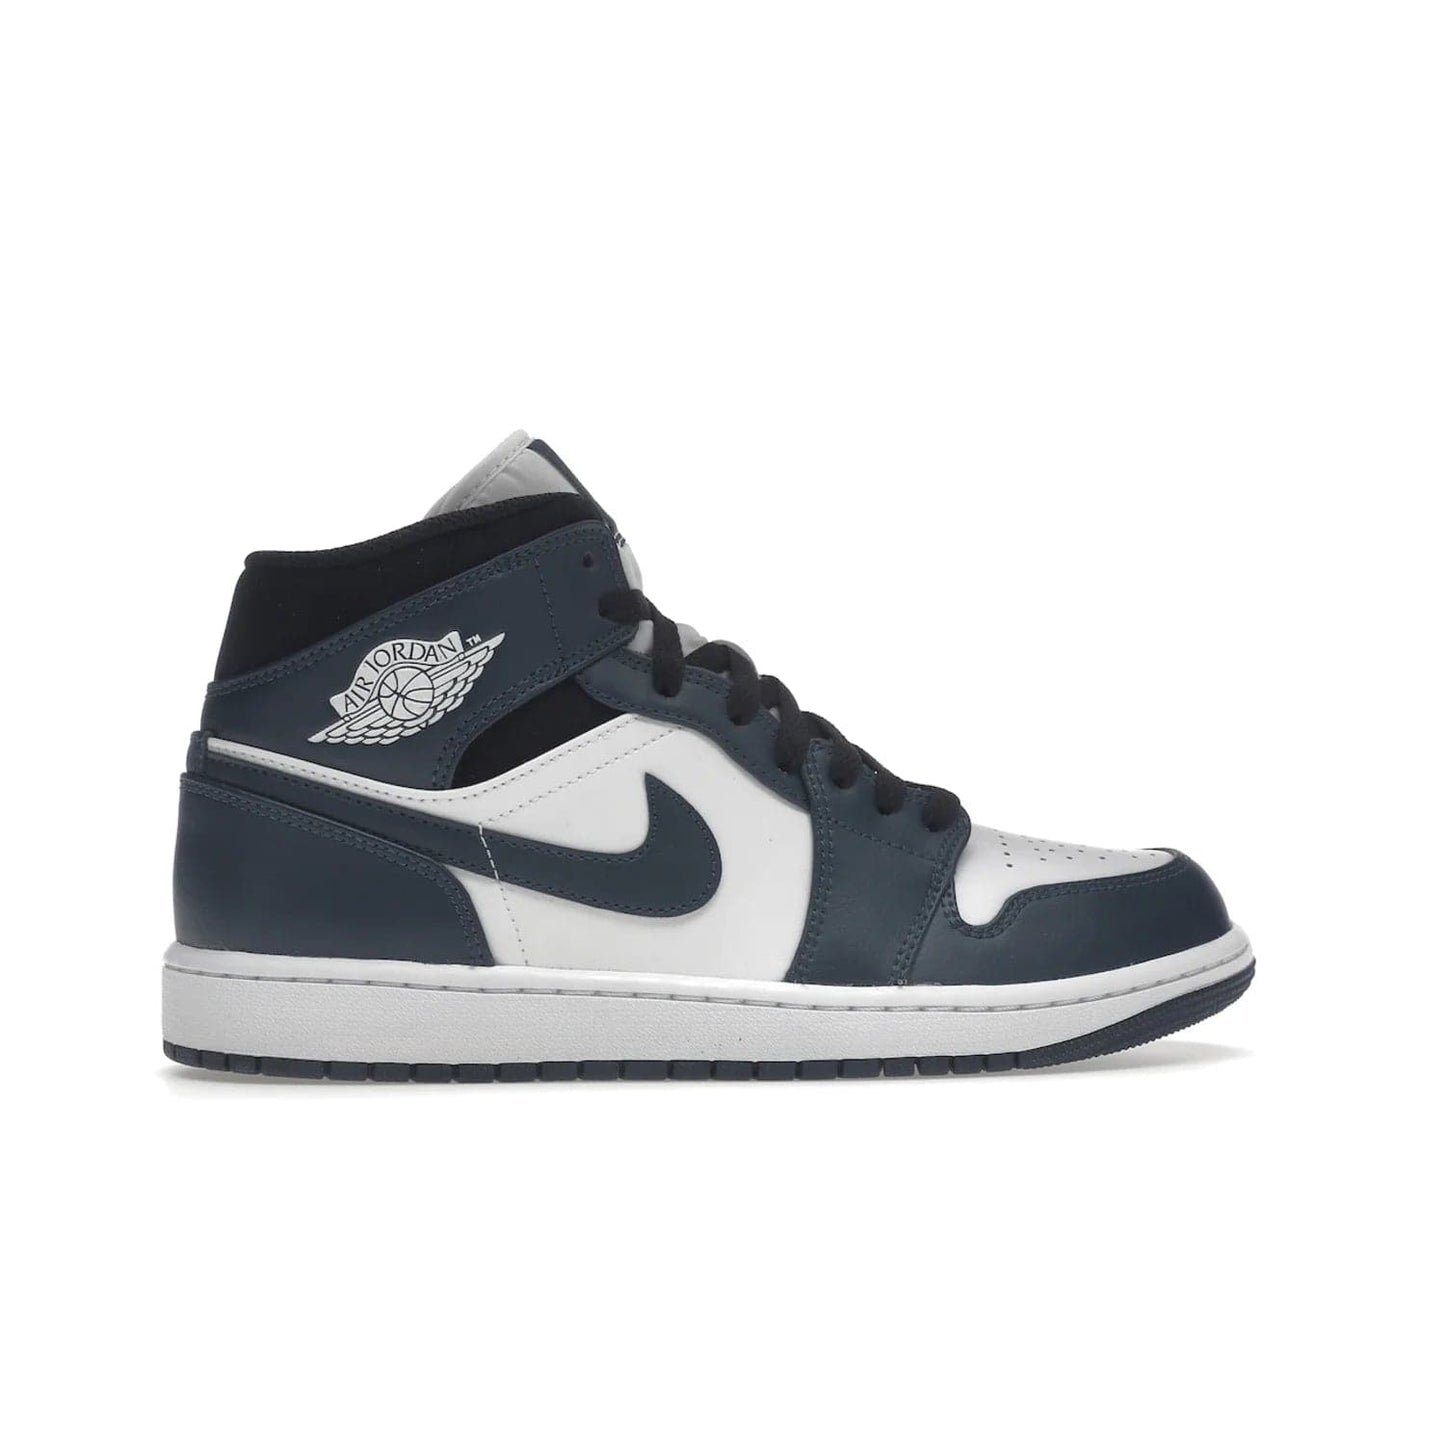 Jordan 1 Mid Armory Navy - Image 36 - Only at www.BallersClubKickz.com - The Jordan 1 Mid Armory Navy: classic basketball sneaker with soft white leather upper, deep navy blue overlays, and black leather ankle detailing. Iconic style with Jordan Wings logo and Jumpman label.